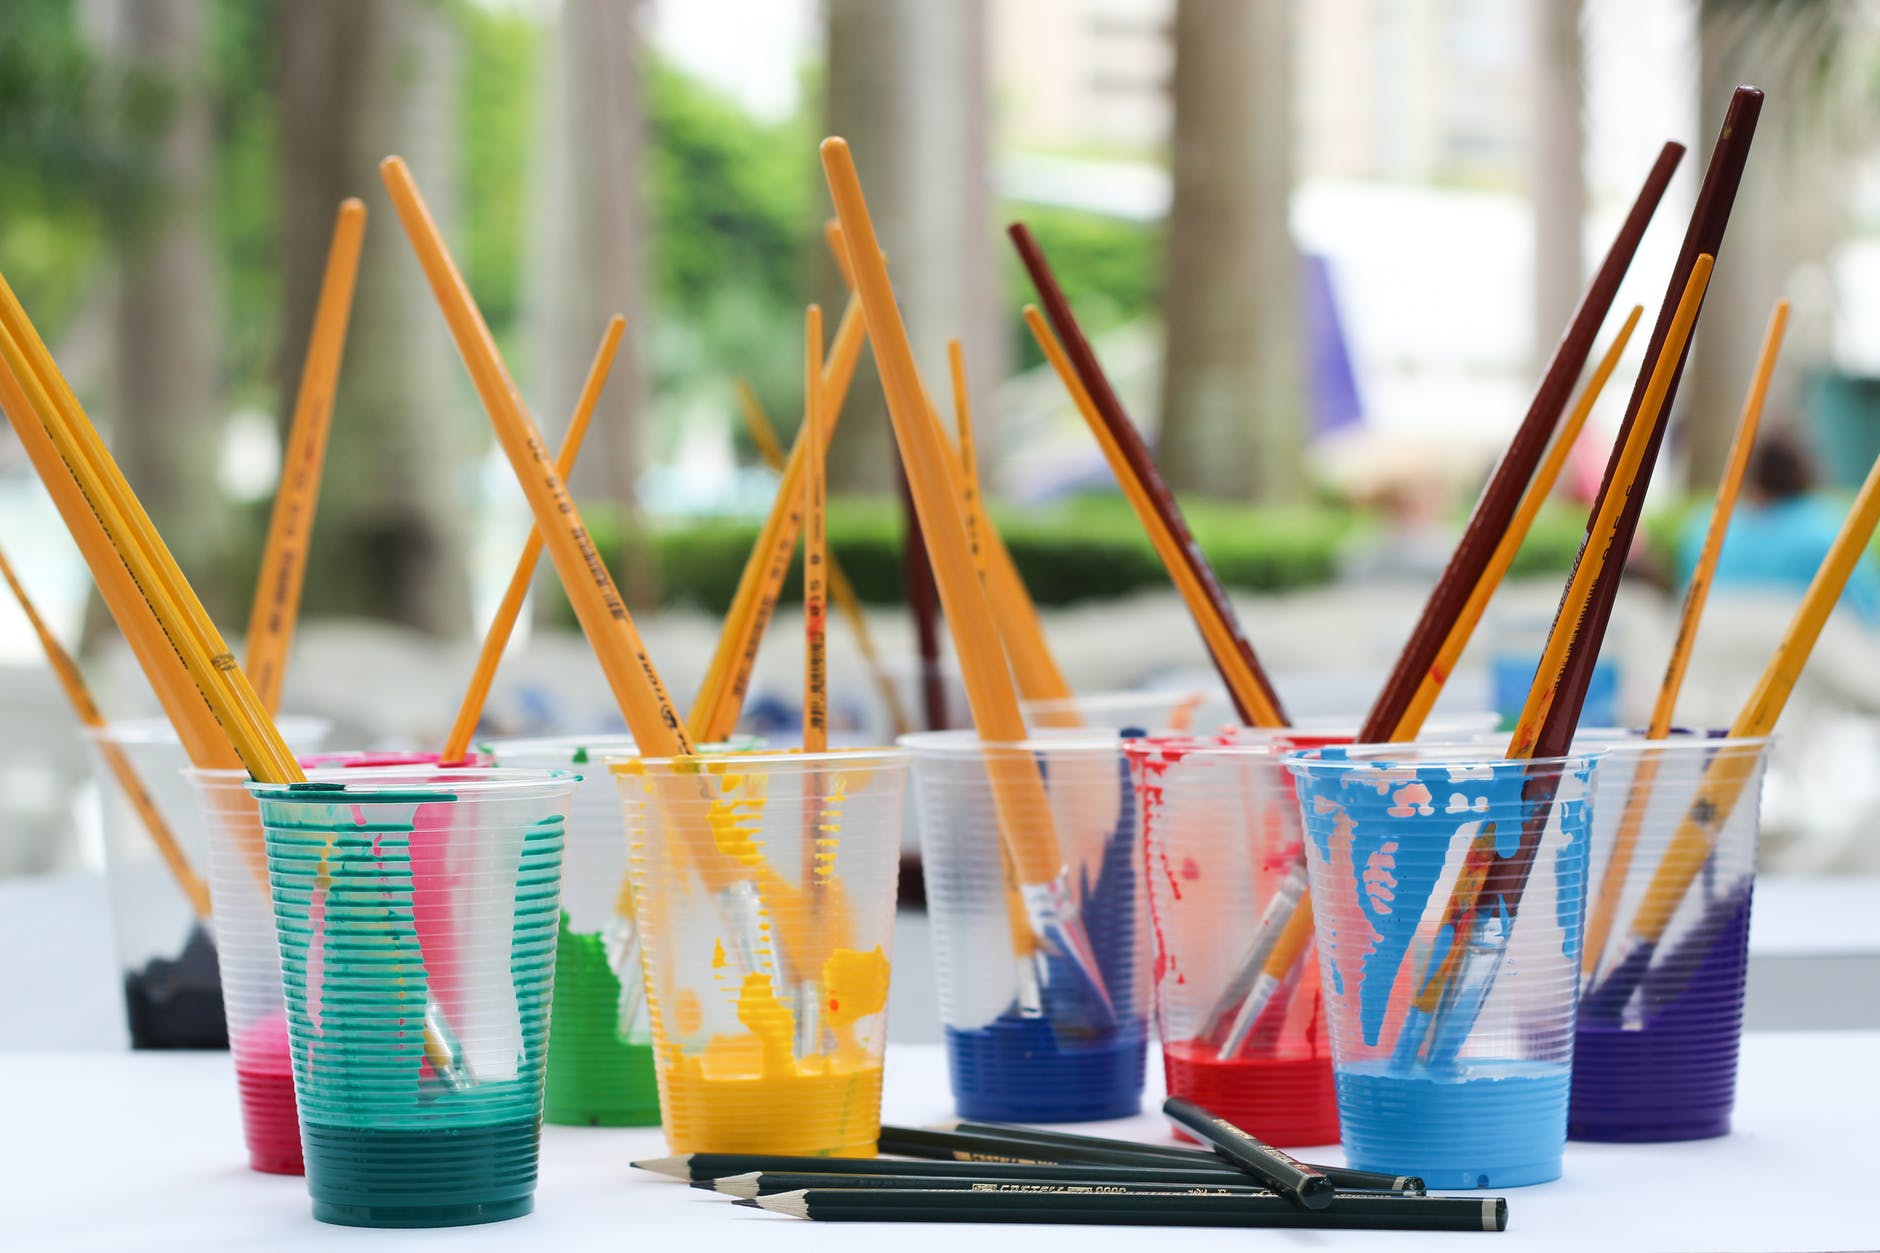 paintbrushes stand up in cups of colorful paint